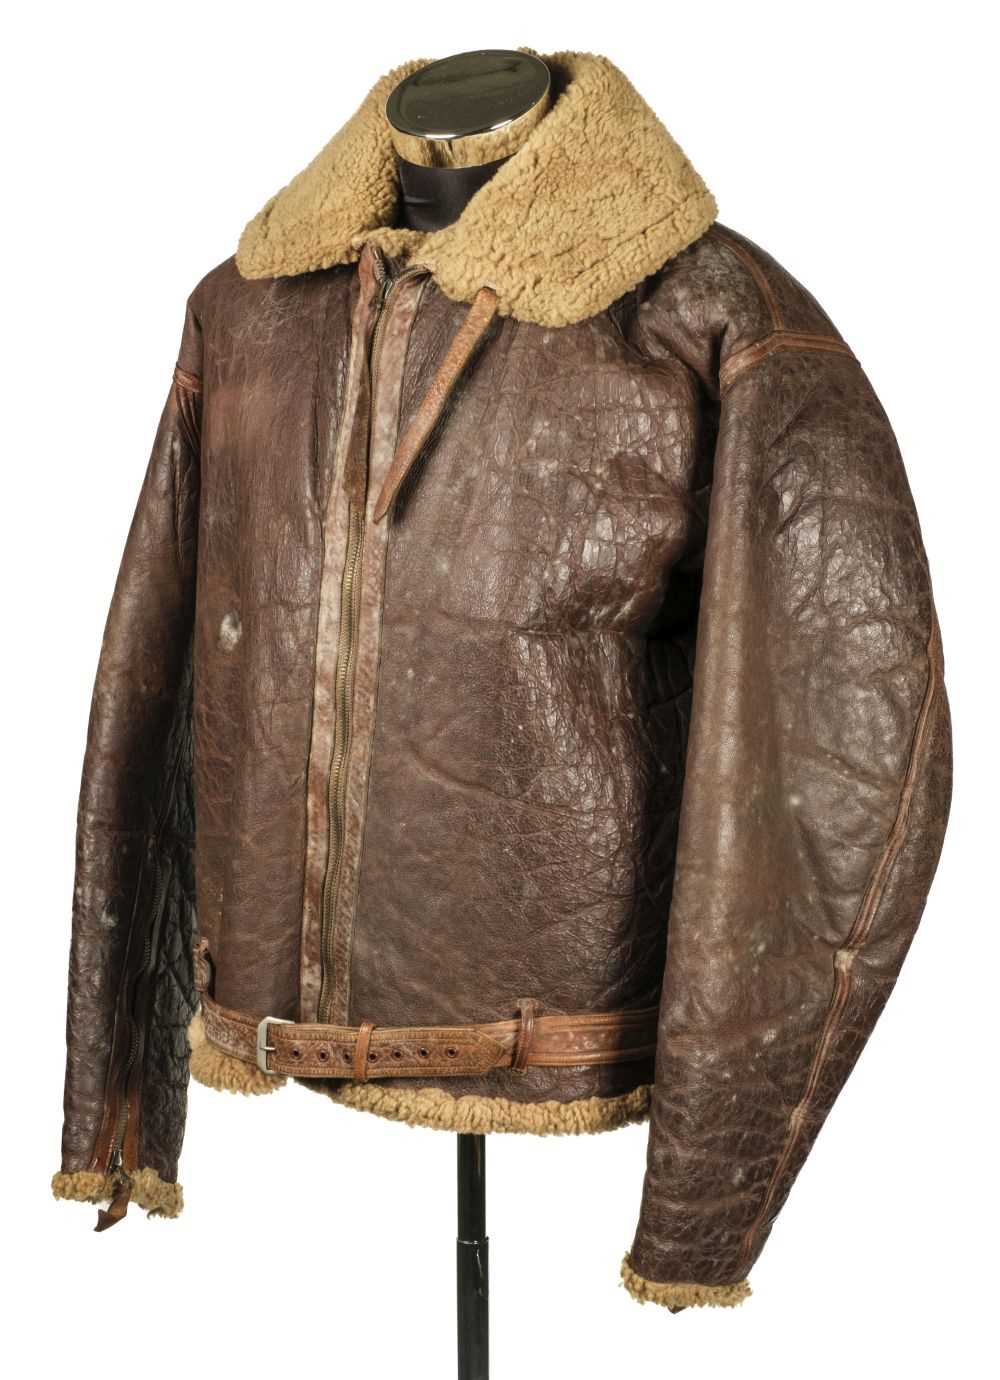 Lot 147 - Flying Jacket. A WWII Irvin brown leather flying jacket - Squadron Leader C. Killeen